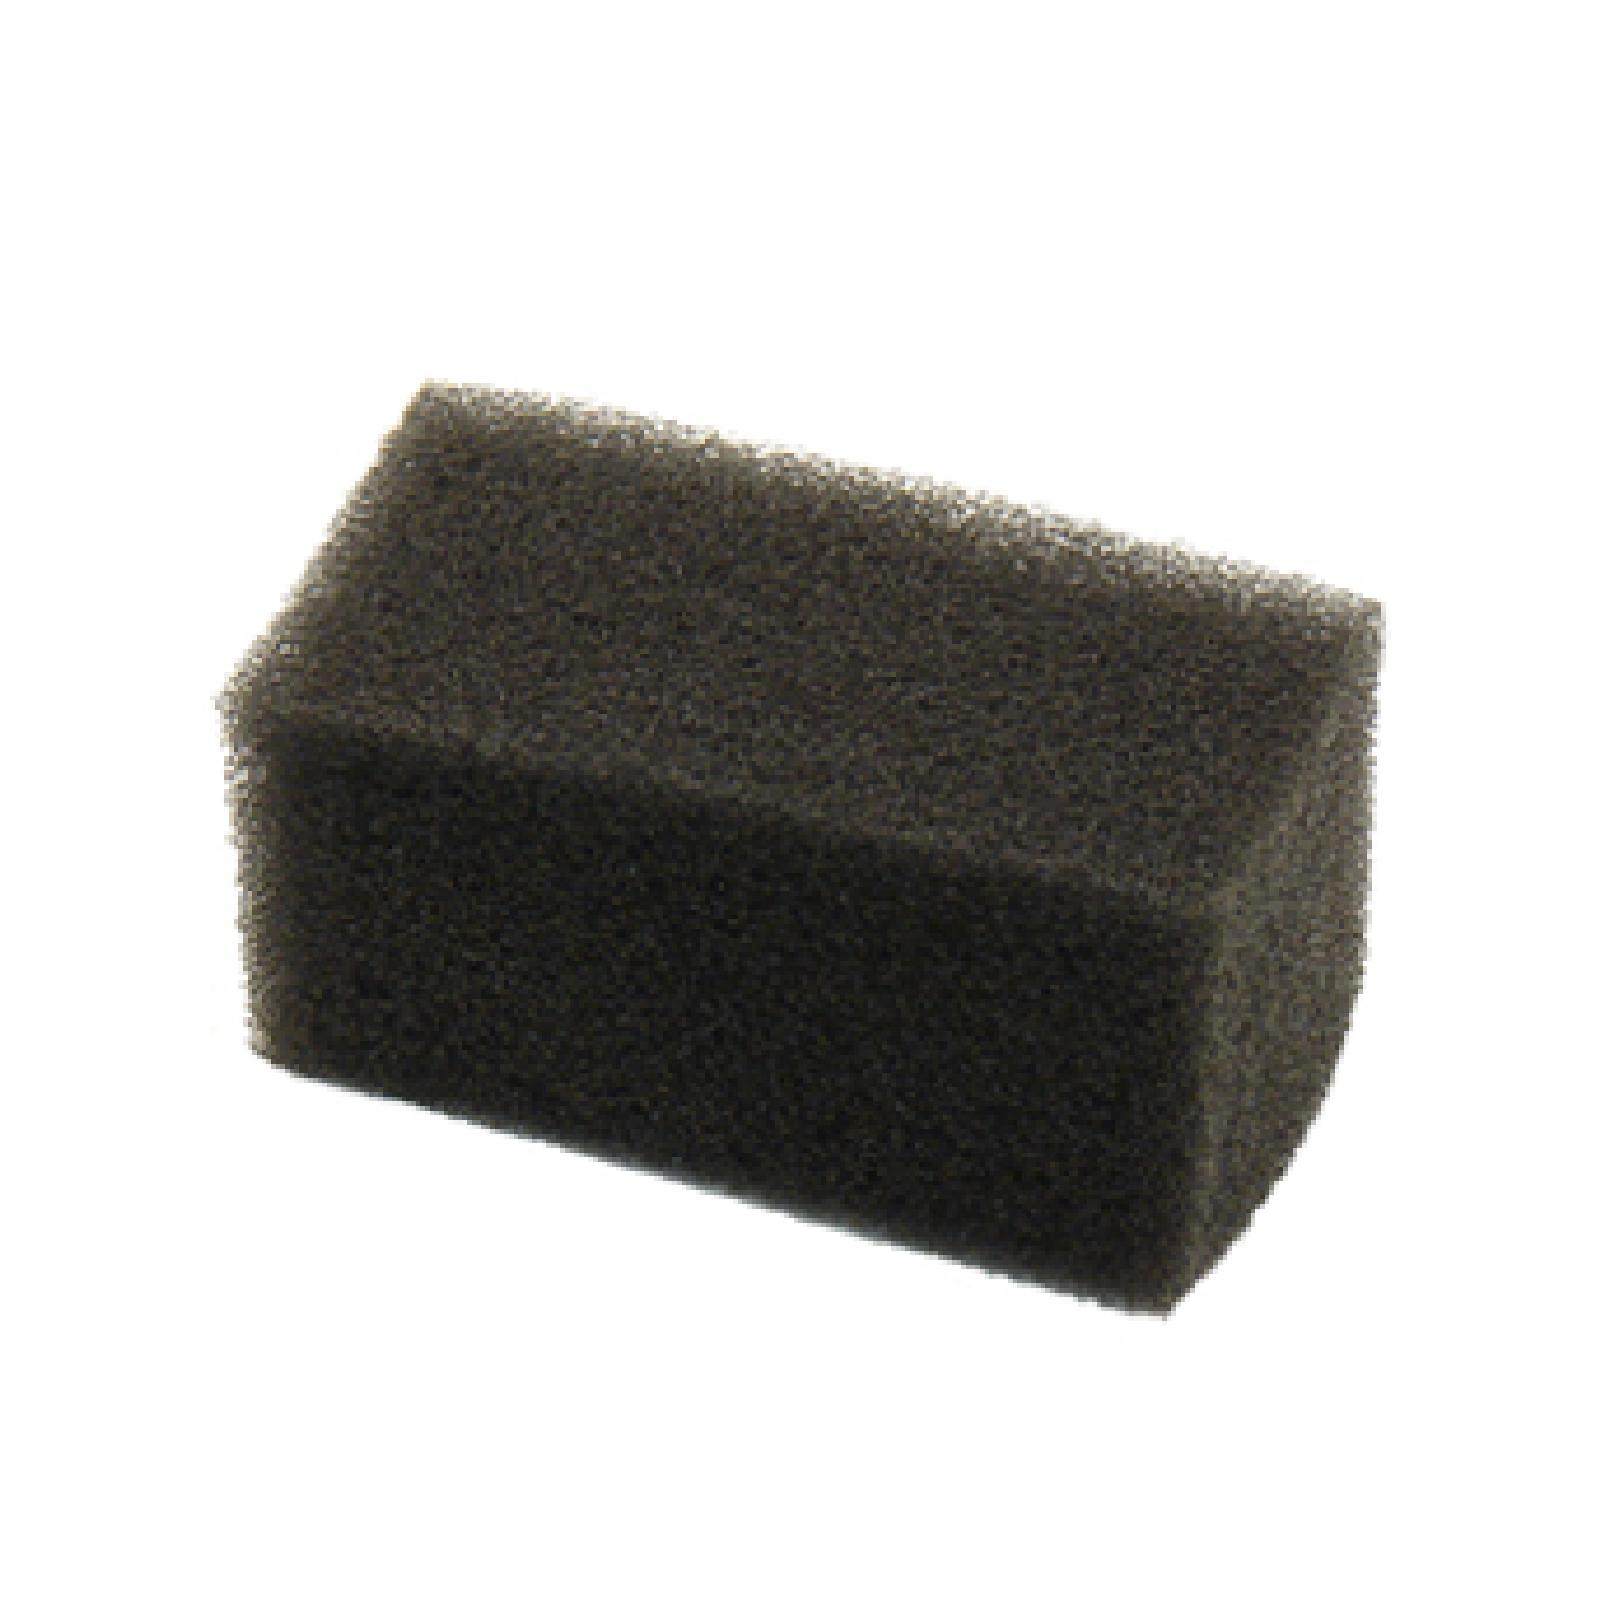 AIR FILTER part# 753-05254 by MTD